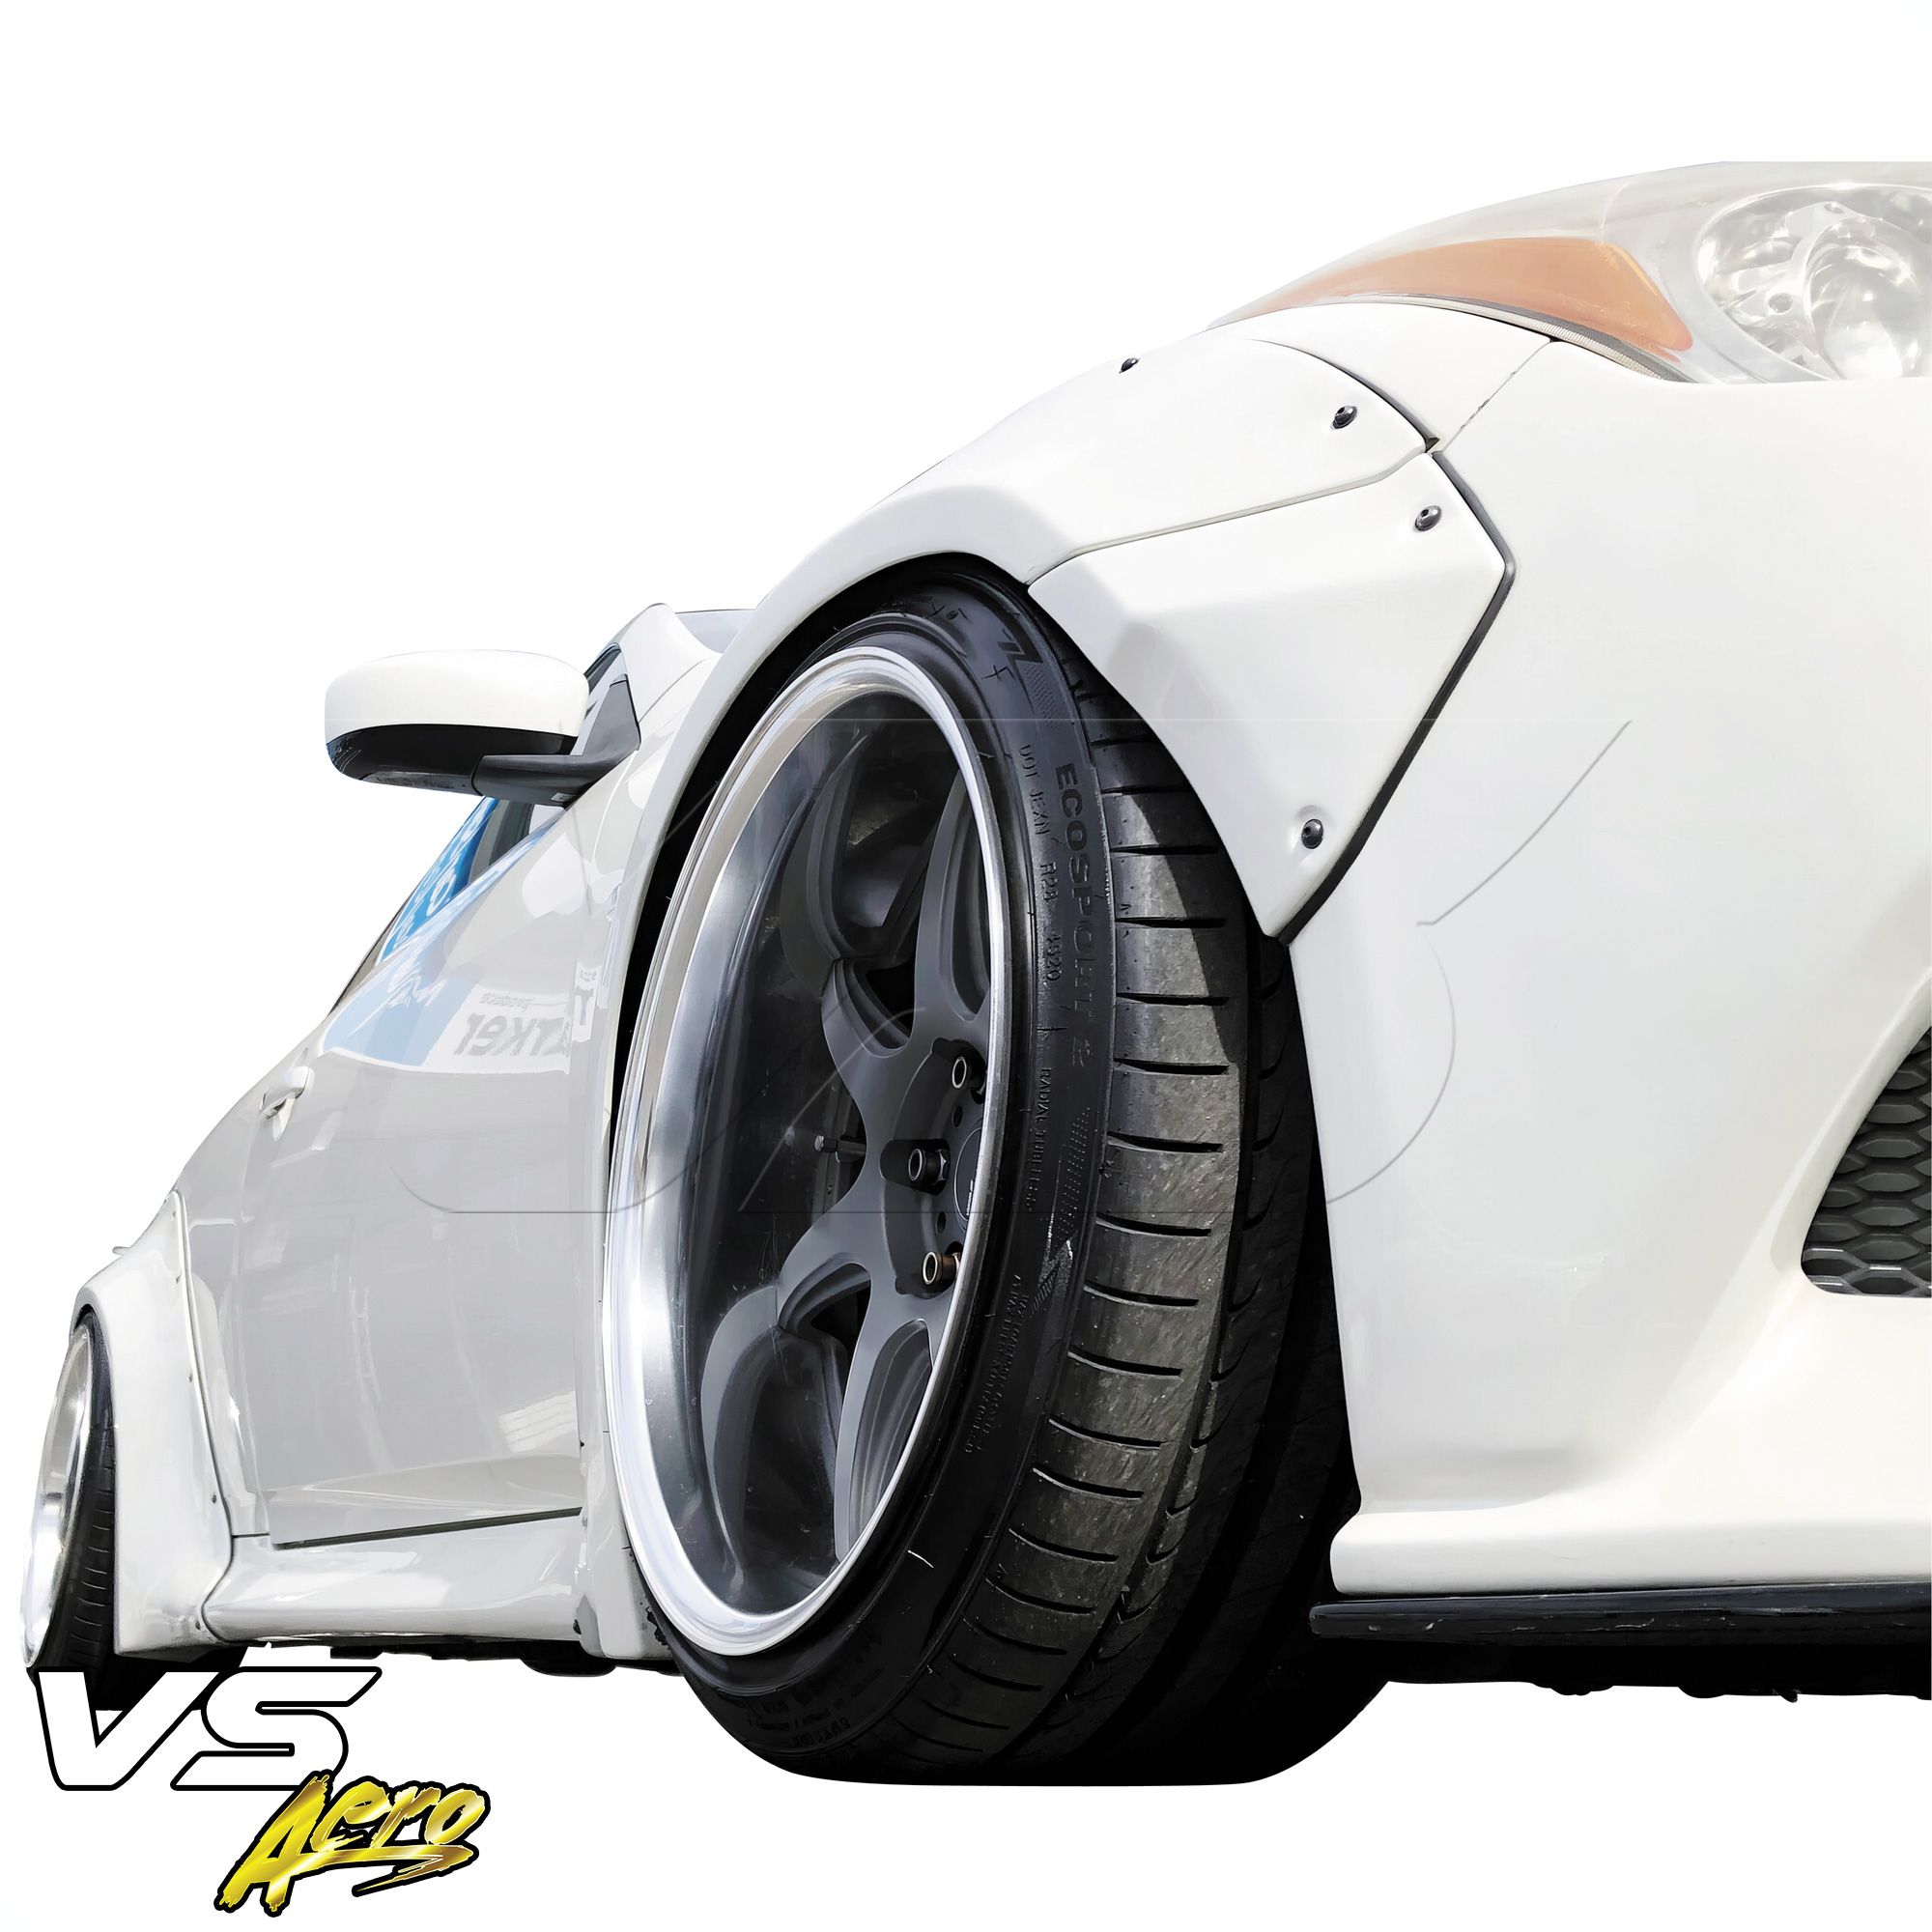 VSaero FRP LBPE Wide Body Fender Flares (front) 4pc > Infiniti G37 Coupe 2008-2015 > 2dr Coupe - Image 28